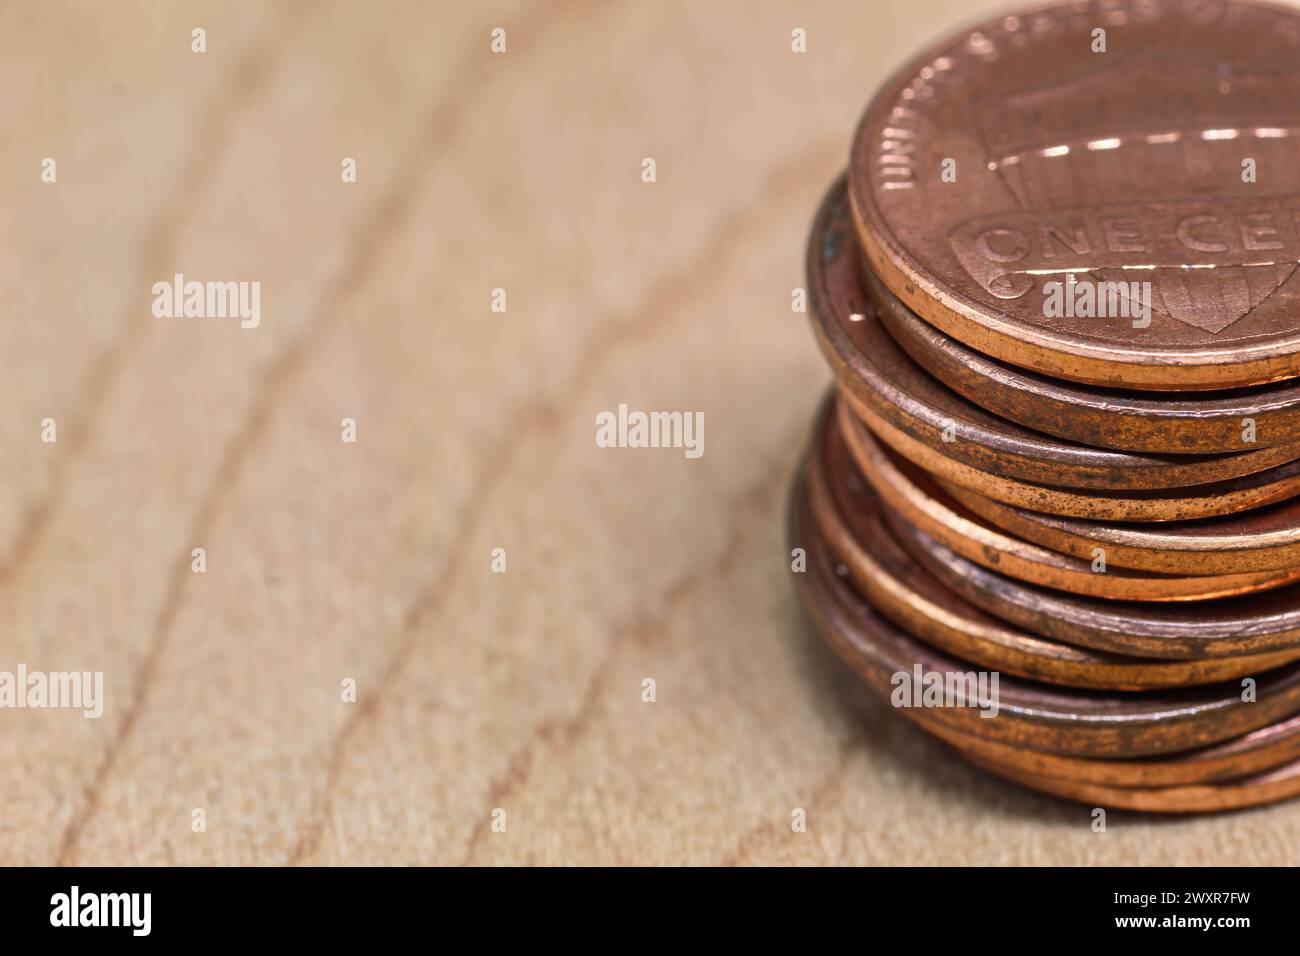 column of old one cent coins on wooden surface Stock Photo